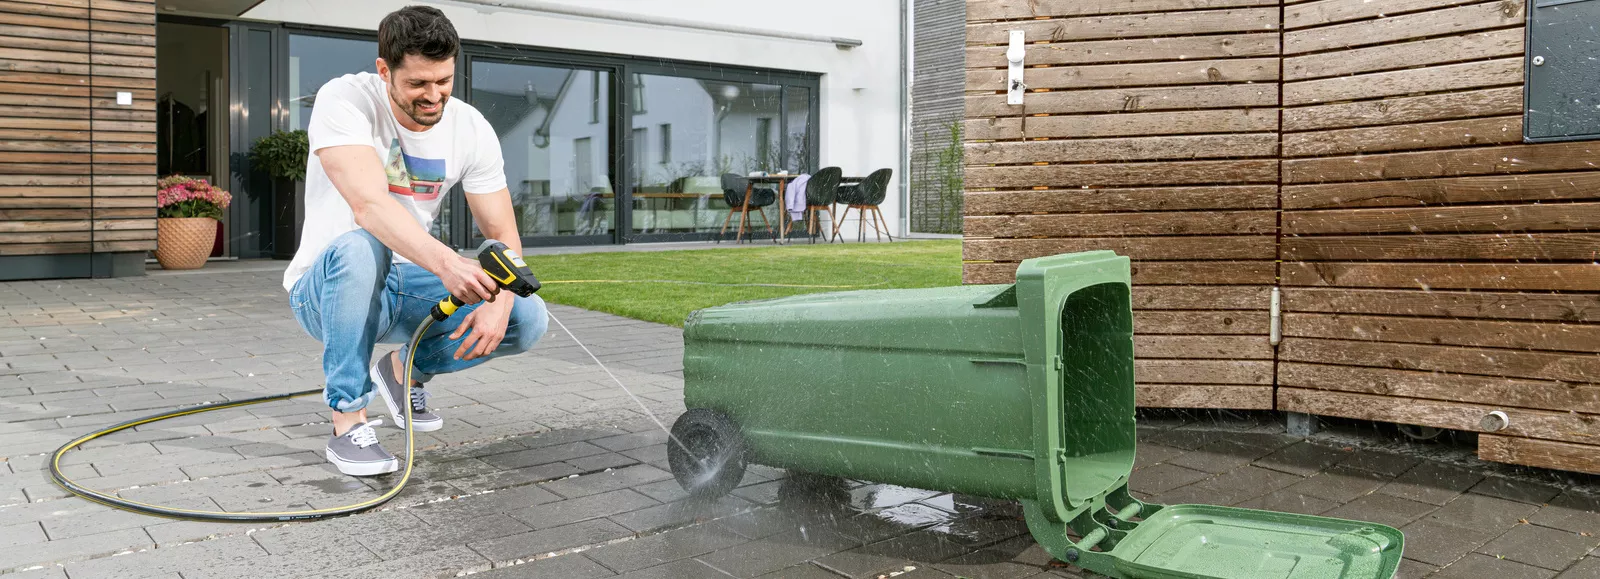 A man cleans a bin with the Kärcher waterbooster